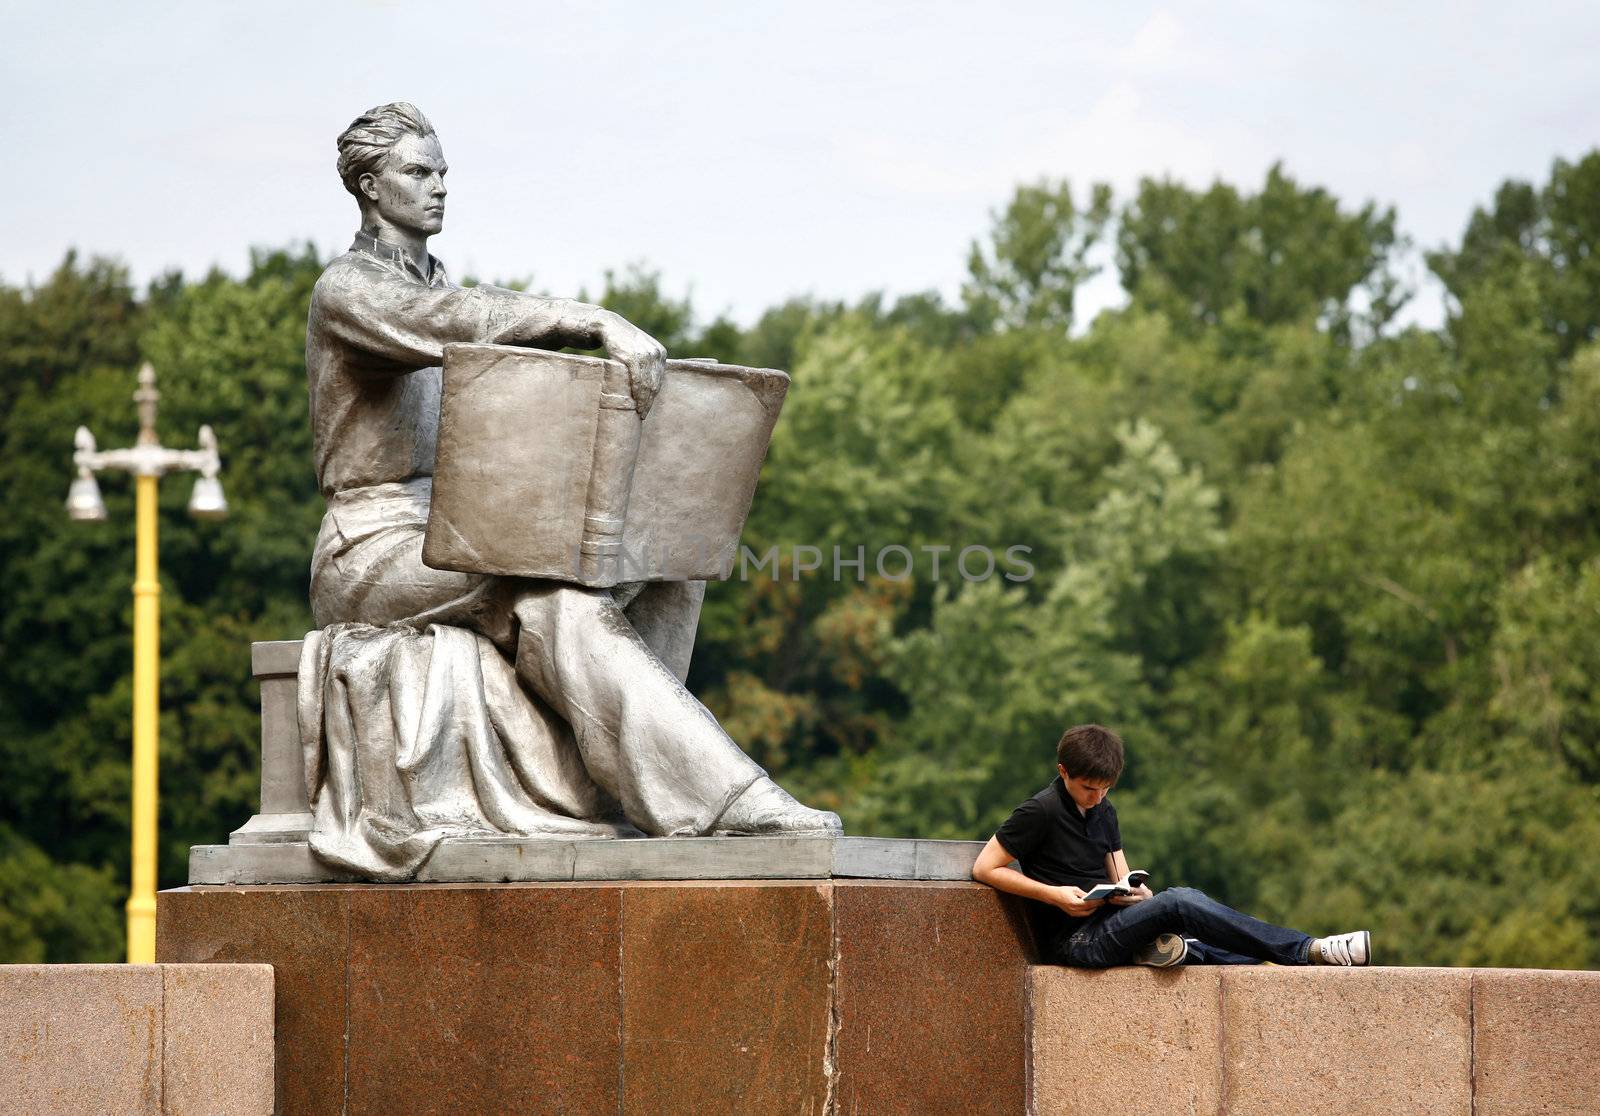 The student reads the book near to a statue